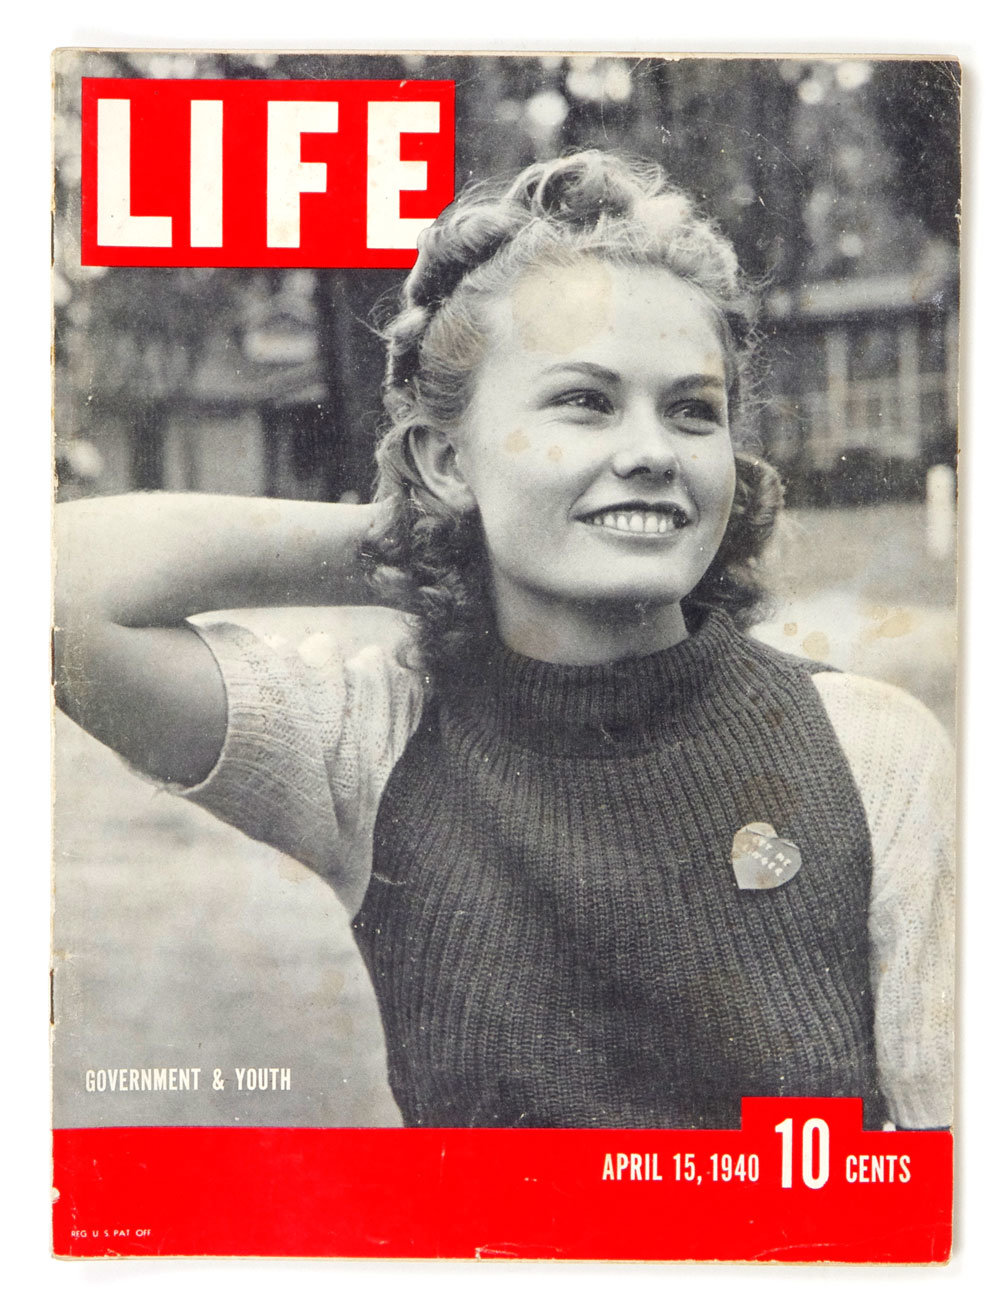 LIFE Magazine Back Issue 1940 April 15 Government & Youth